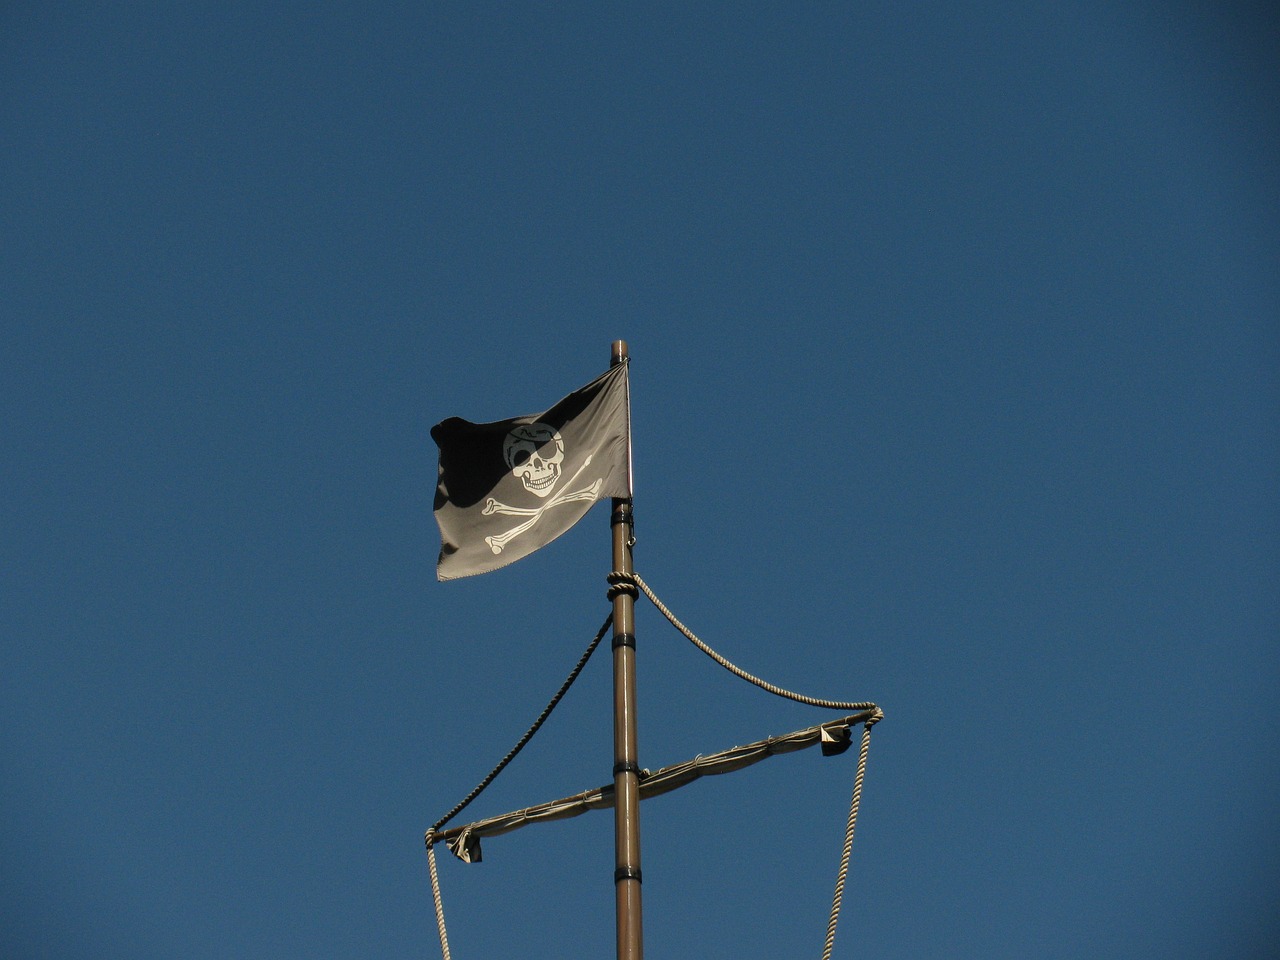 A pirate flag at the top of the mast